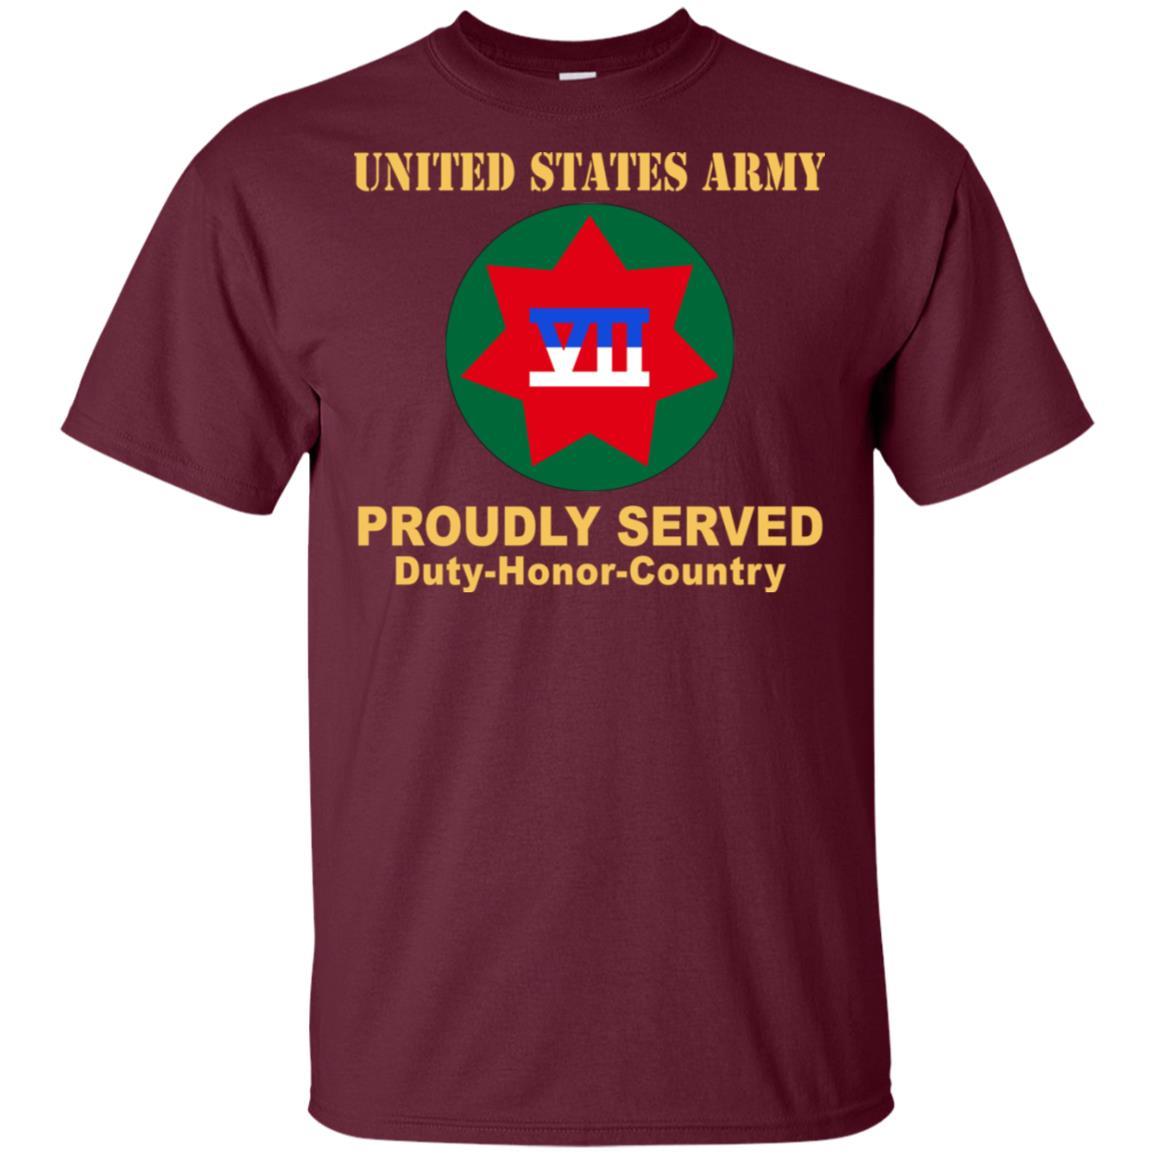 US ARMY VII CORPS- Proudly Served T-Shirt On Front For Men-TShirt-Army-Veterans Nation